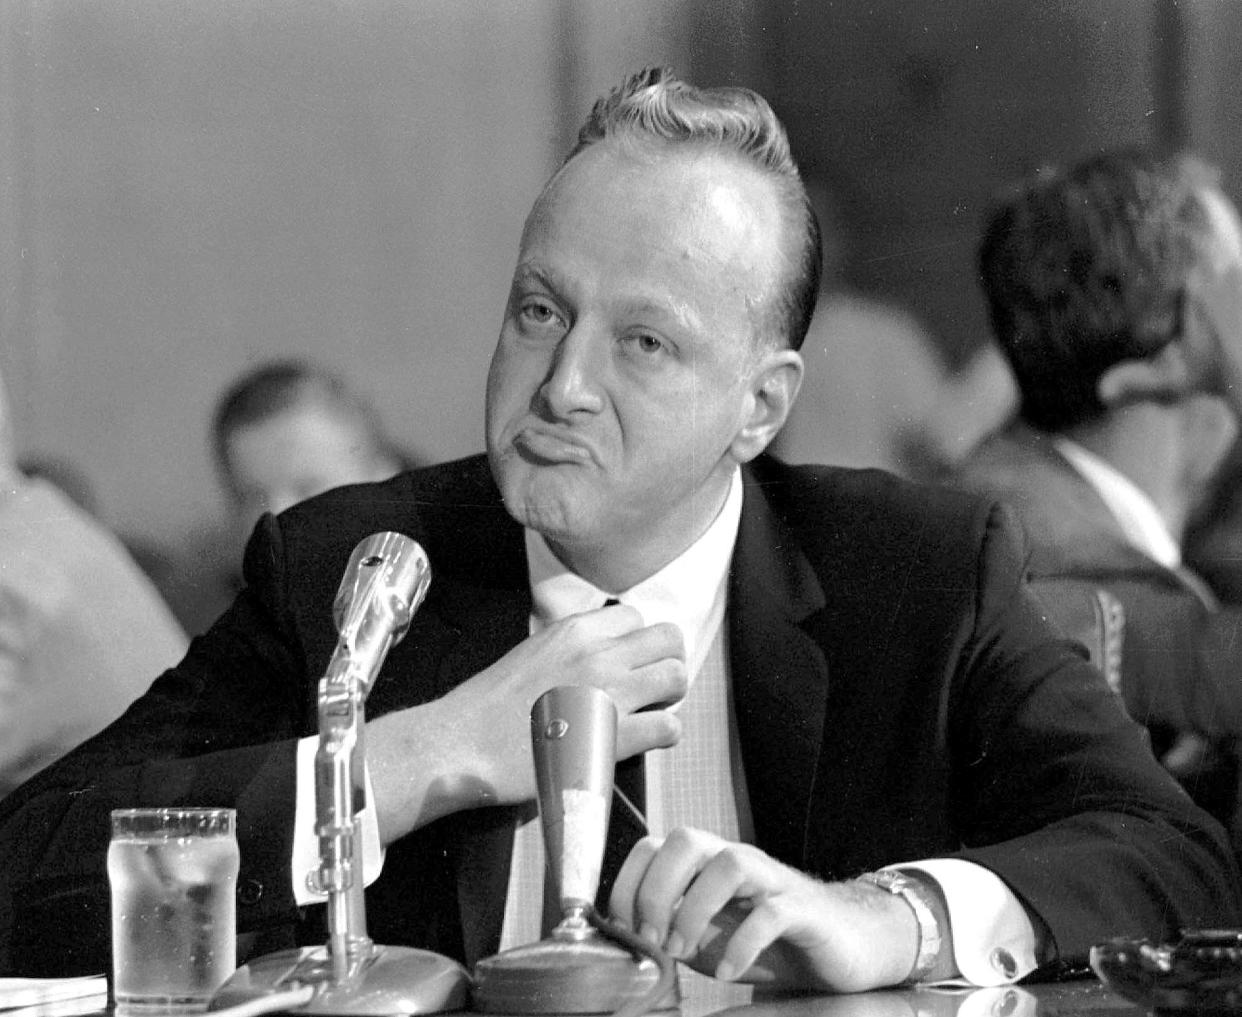 A 1961 photo shows Frank Rosenthal at a witness table before the Senate Investigations Subcommittee in Washington during a probe of organized gambling. Rosenthal was portrayed by Robert De Niro in the 1995 film "Casino."